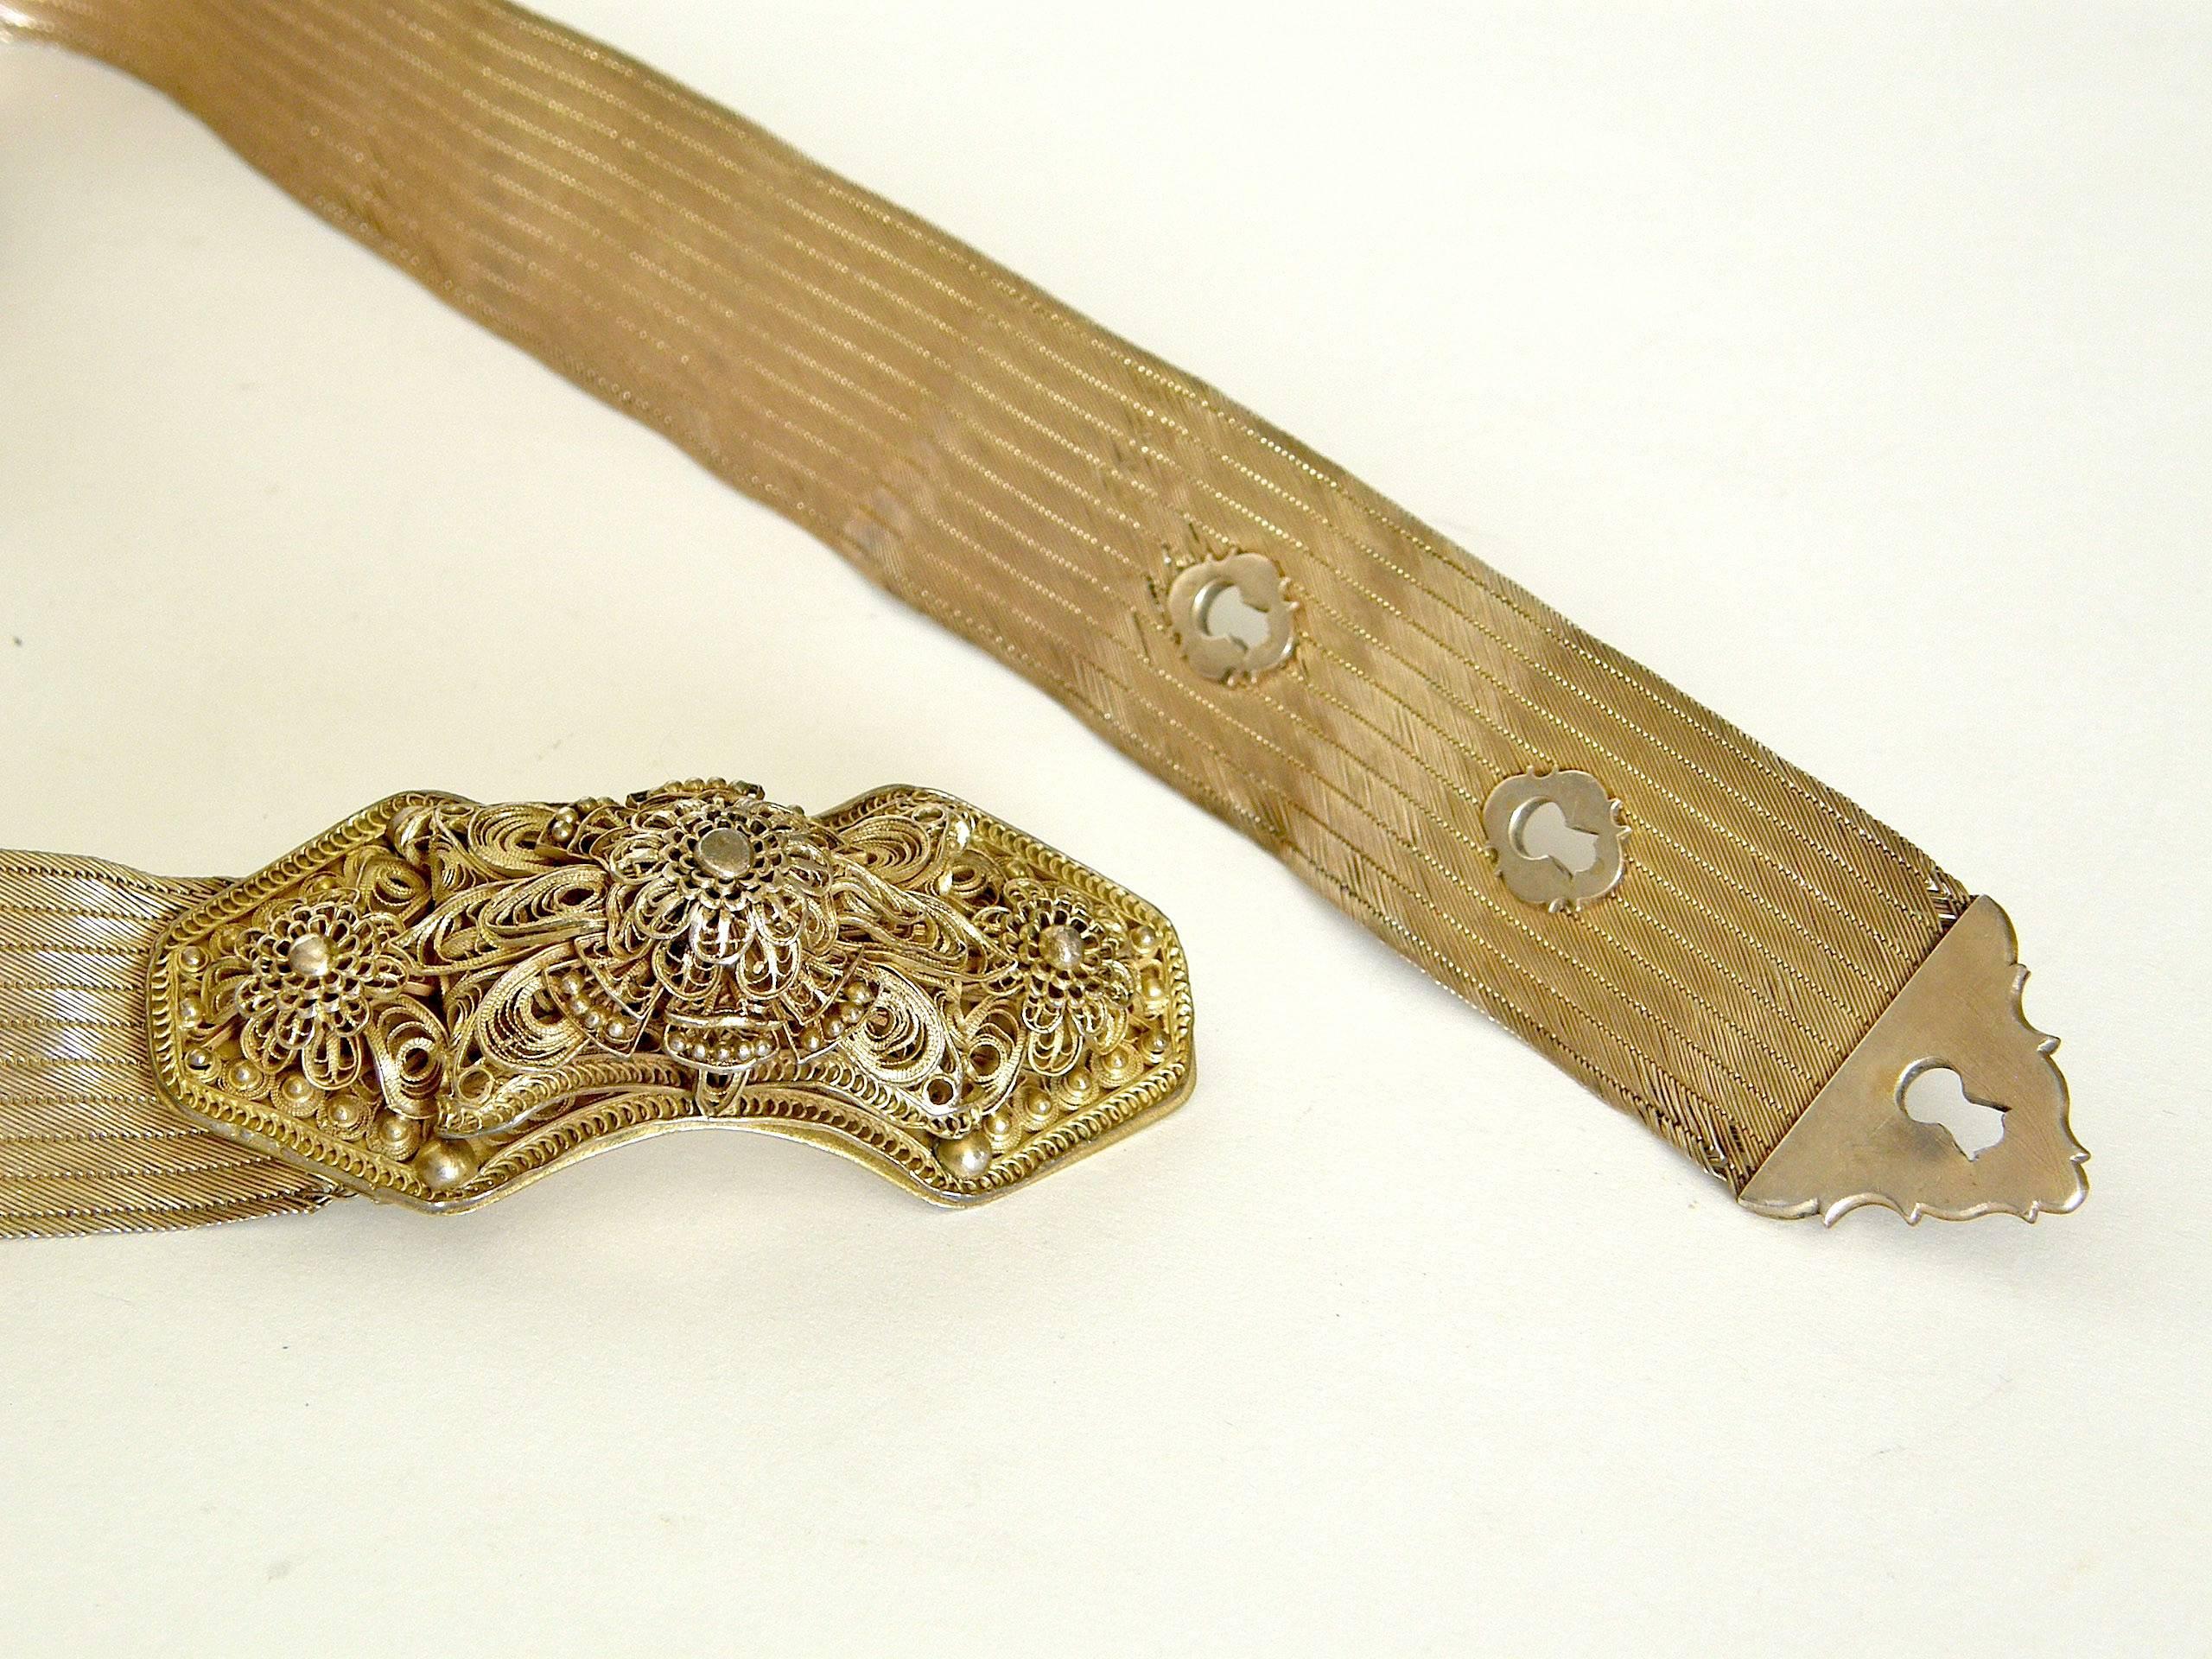 Antique Woven Sterling Mesh Belt with Gold Wash and Elaborate Filigree Buckle In Good Condition For Sale In Chicago, IL